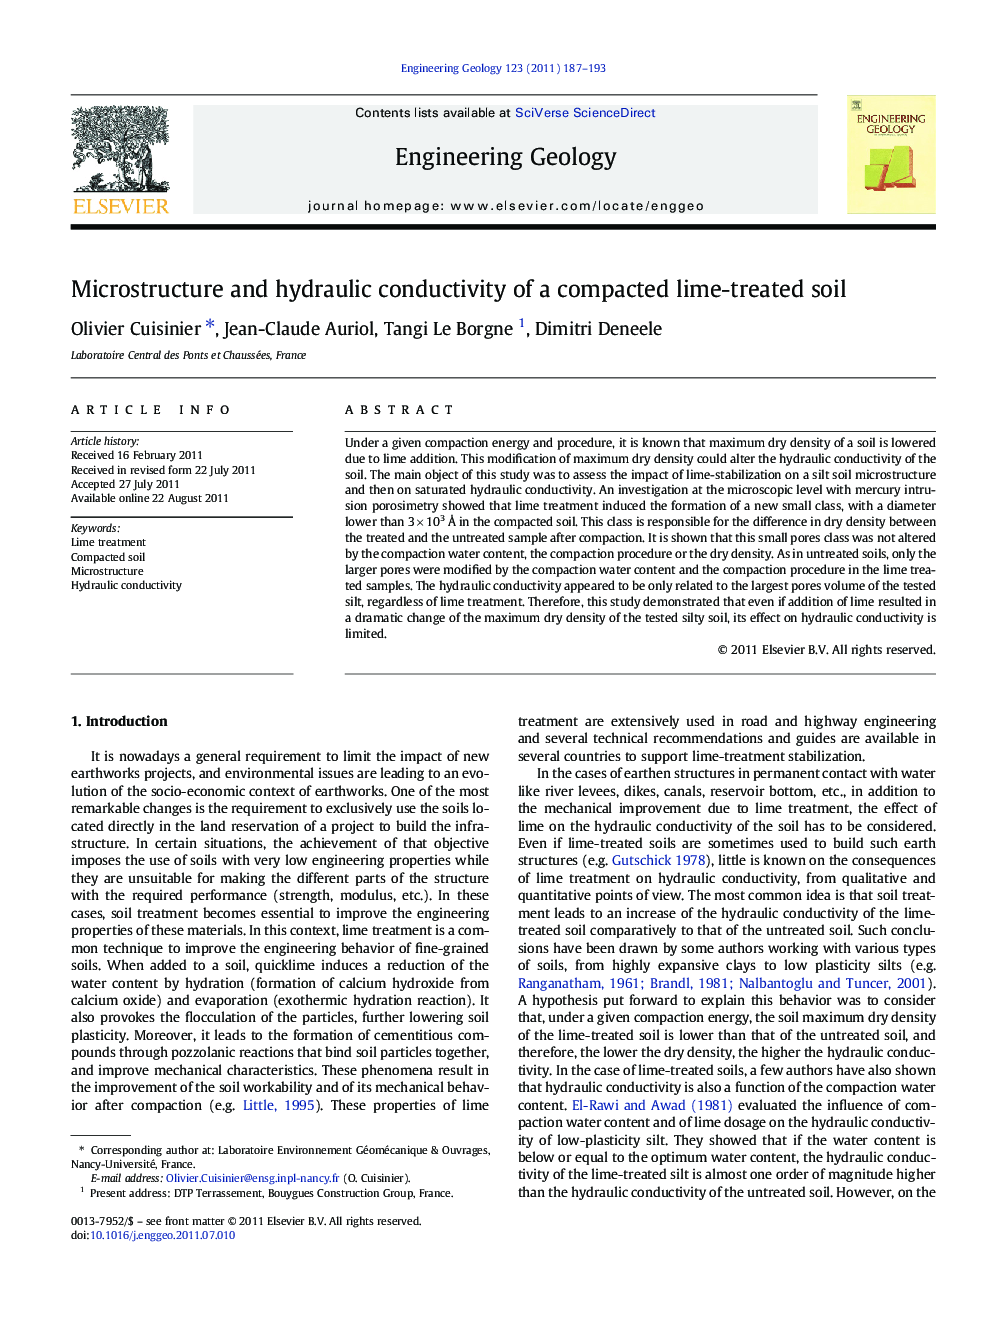 Microstructure and hydraulic conductivity of a compacted lime-treated soil